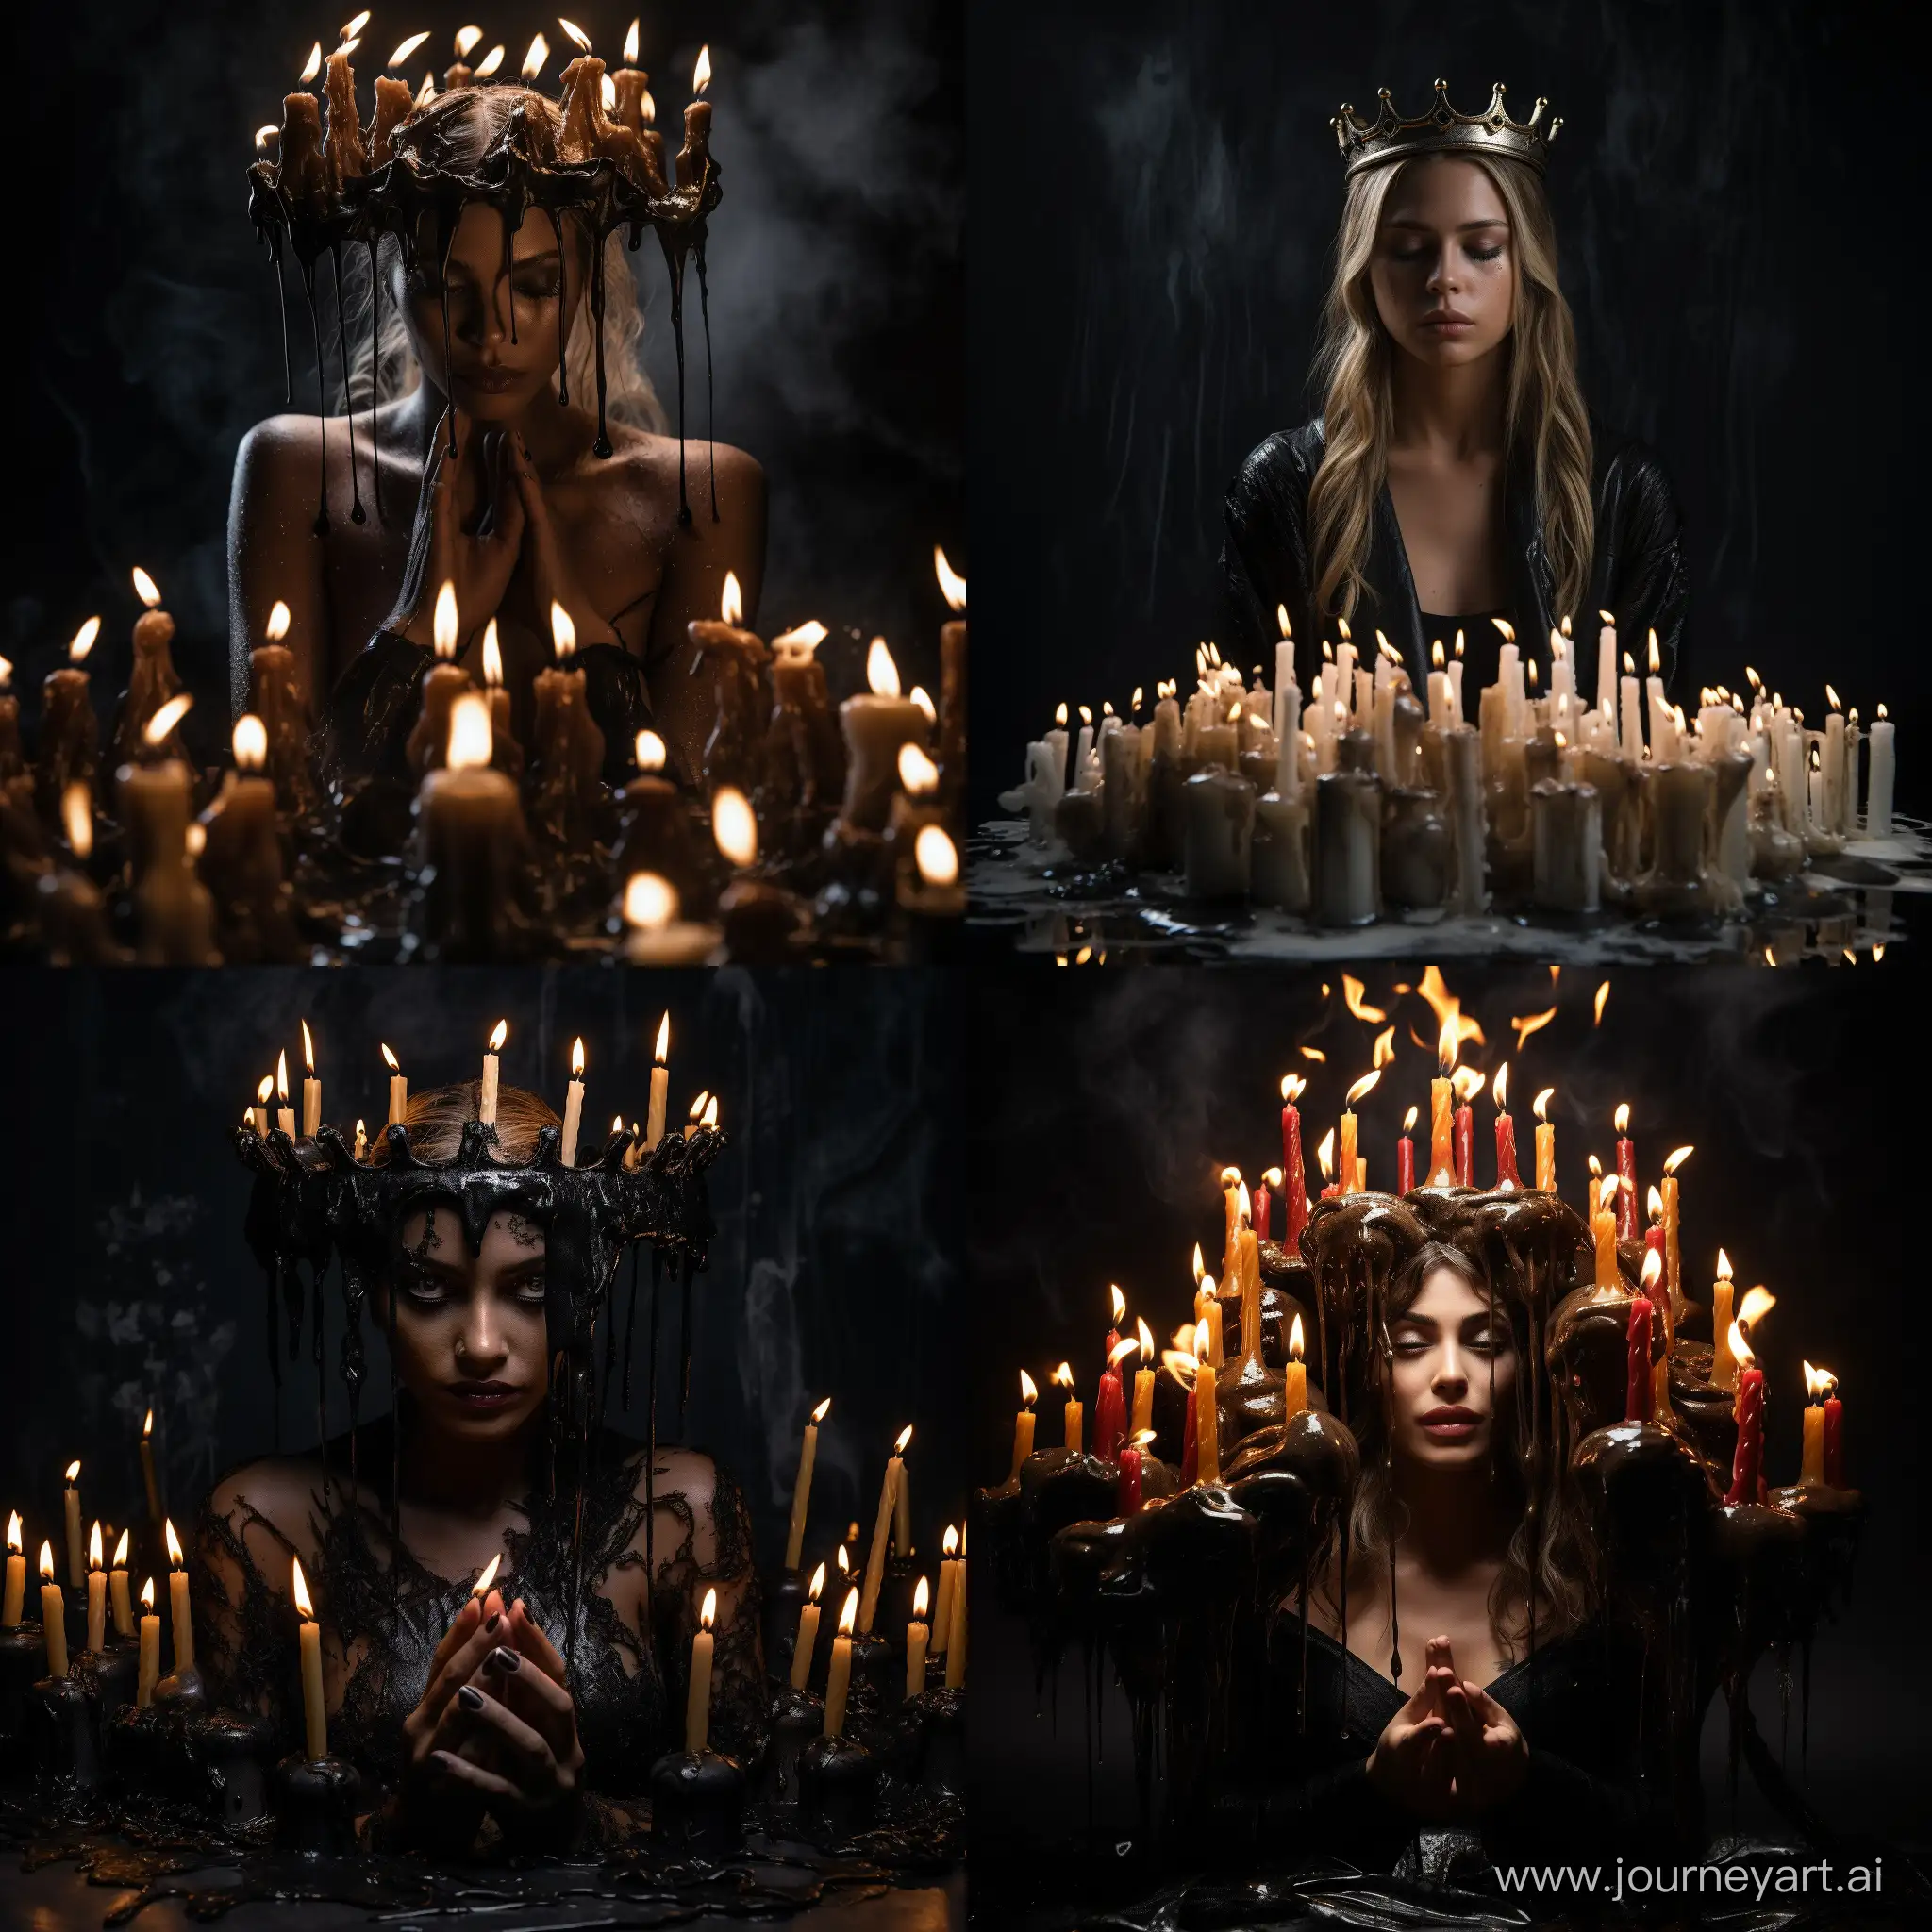 Enchanting-Queen-Adorned-with-Candle-Crown-and-Melted-Wax-Decorations